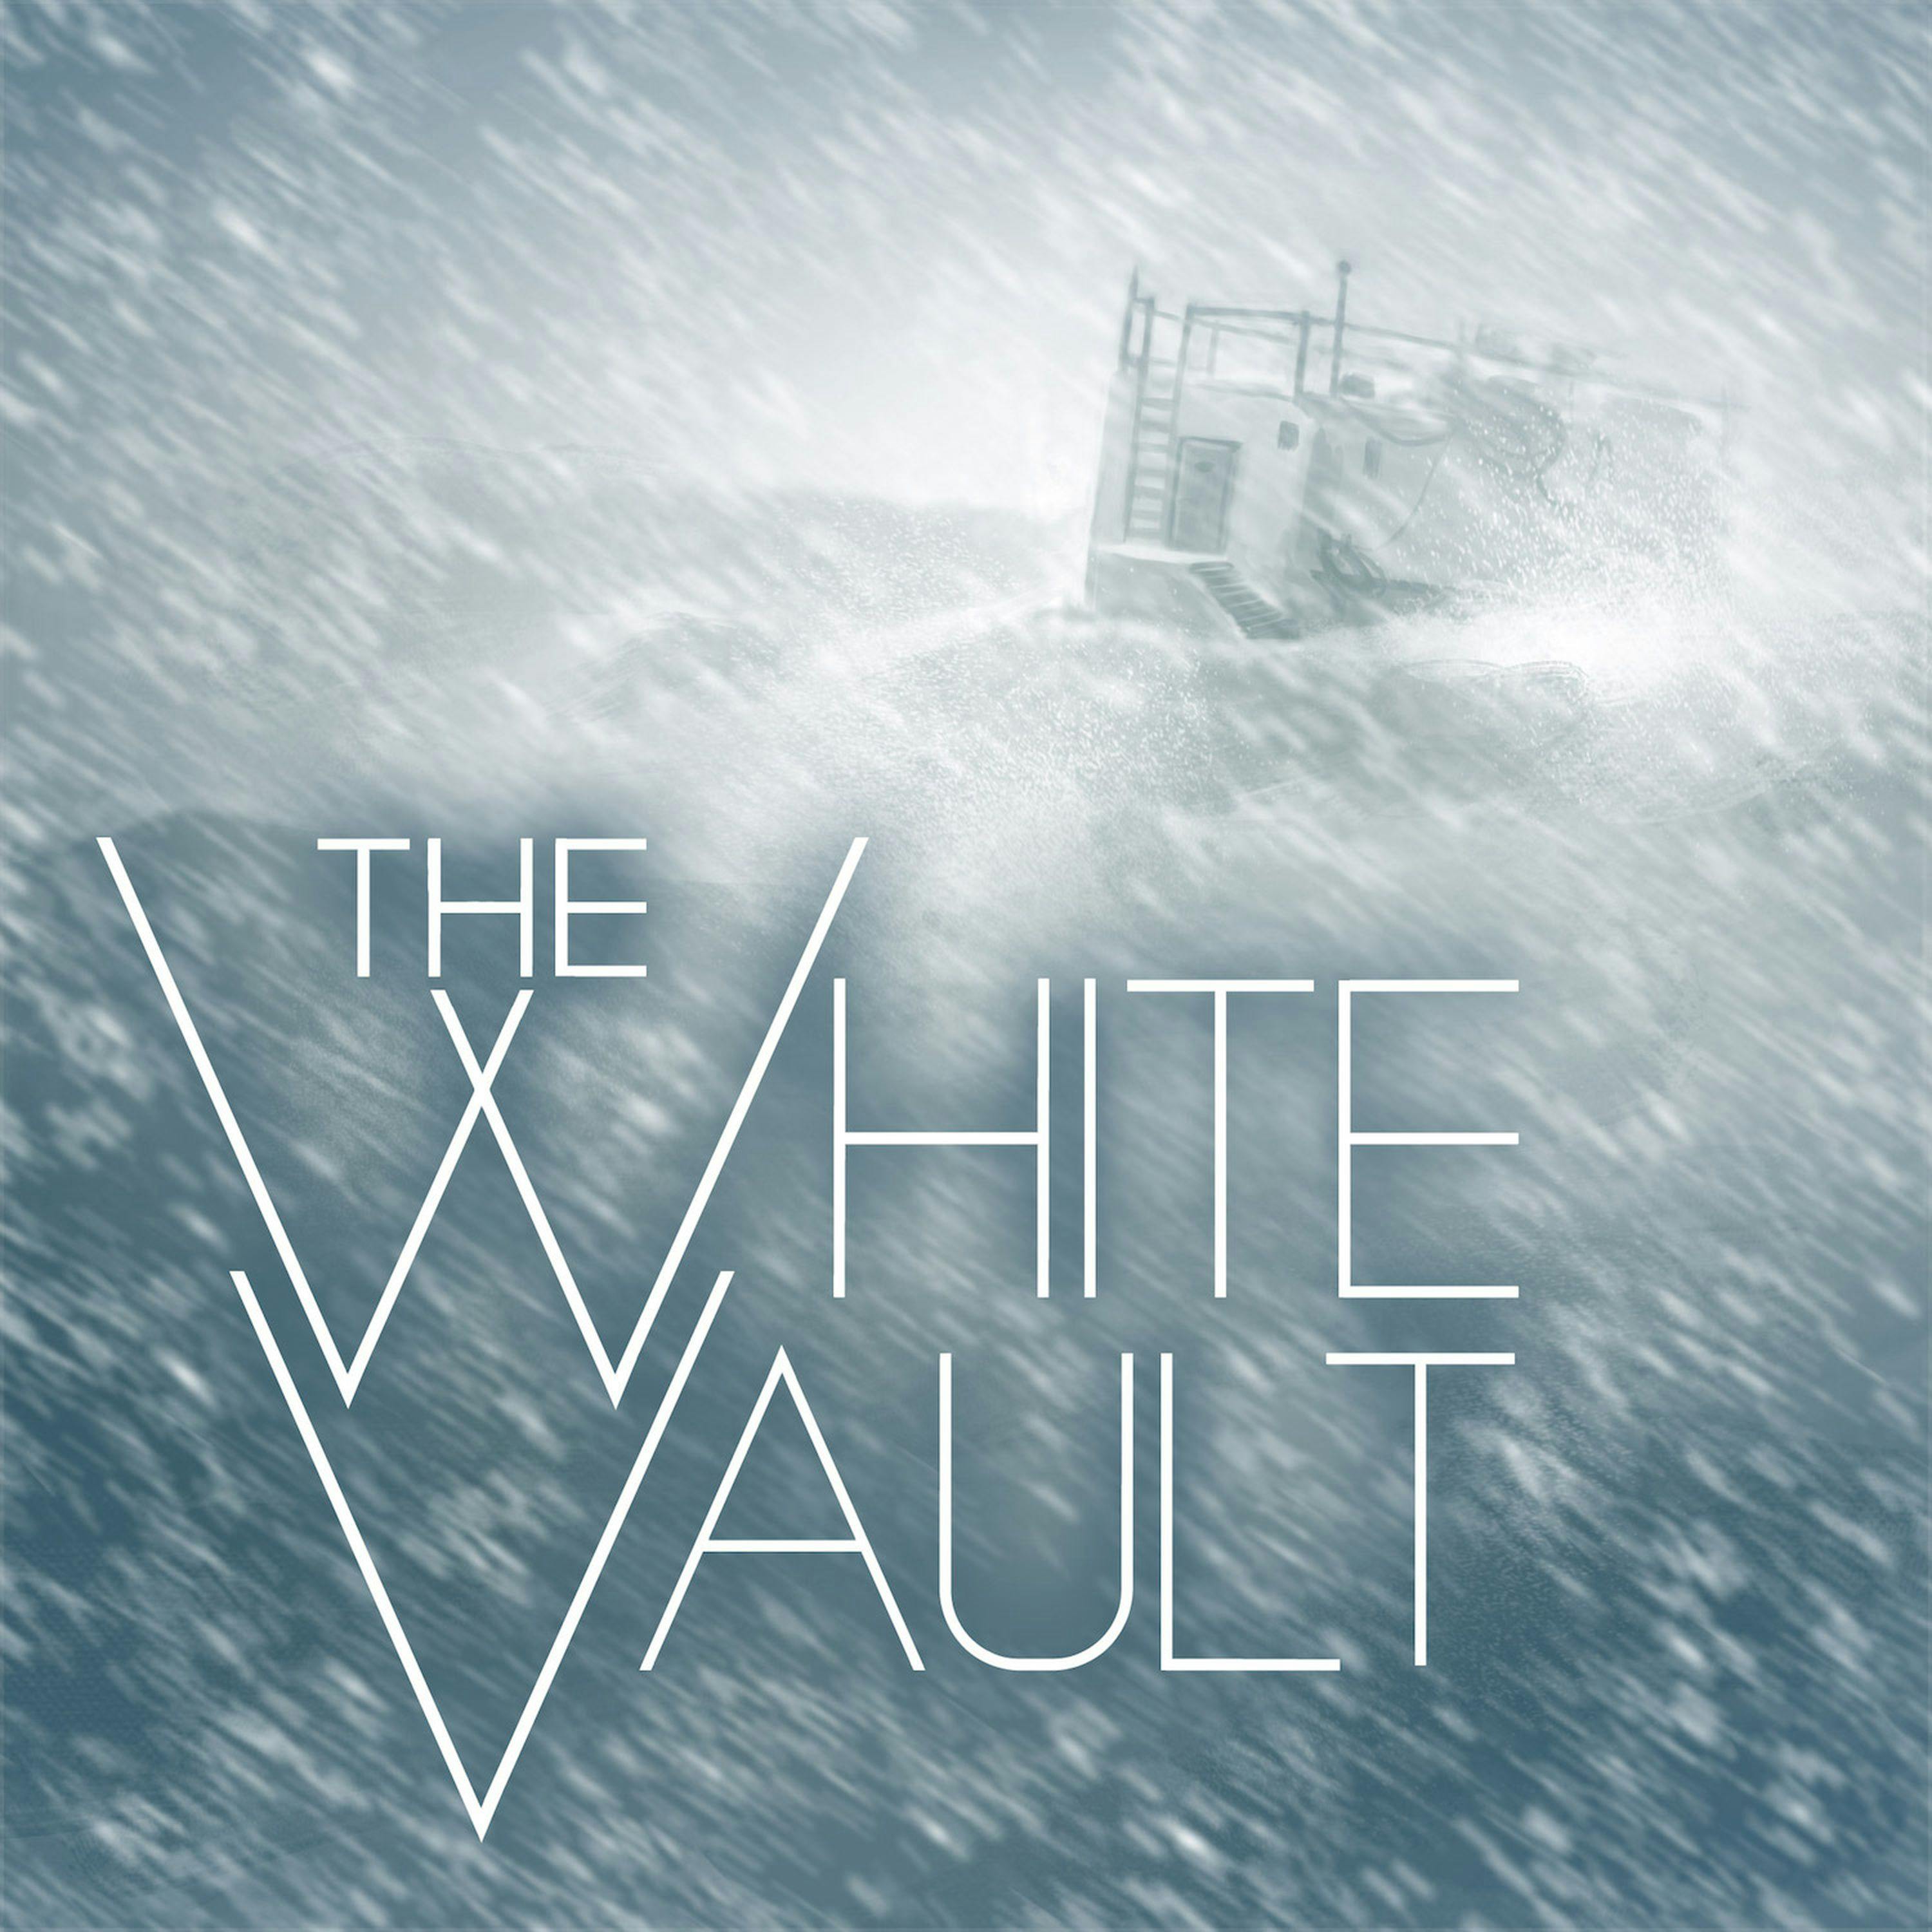 The White Vault: Announcements & Artifact Trailer